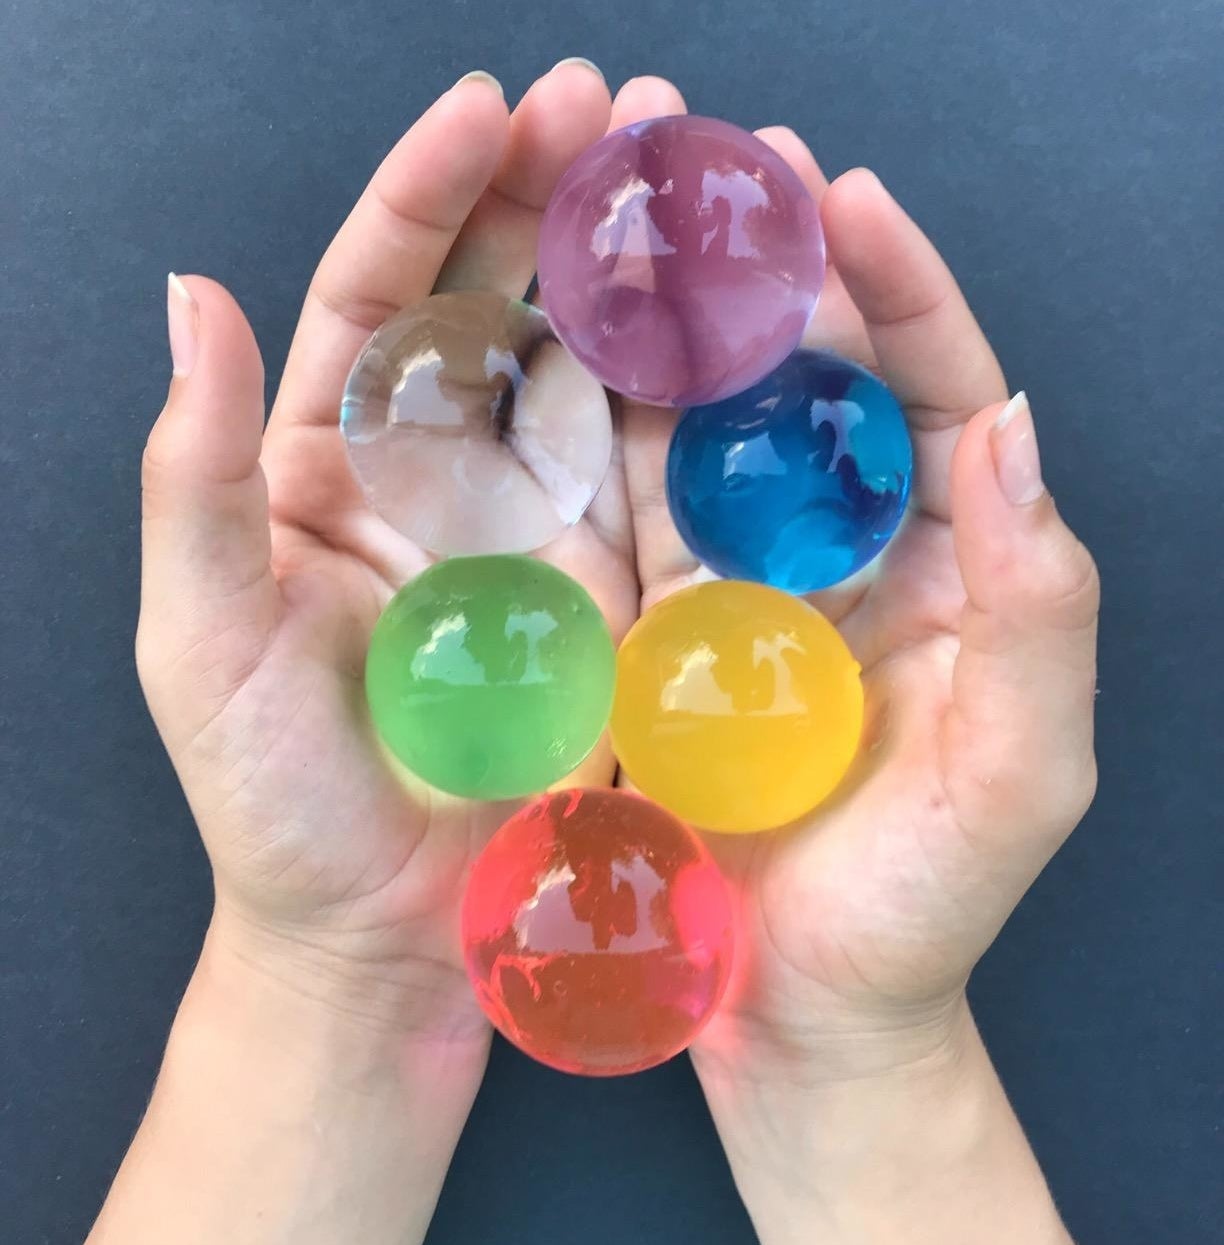 Amazon reviewer displays giant water beads in a variety of colors 